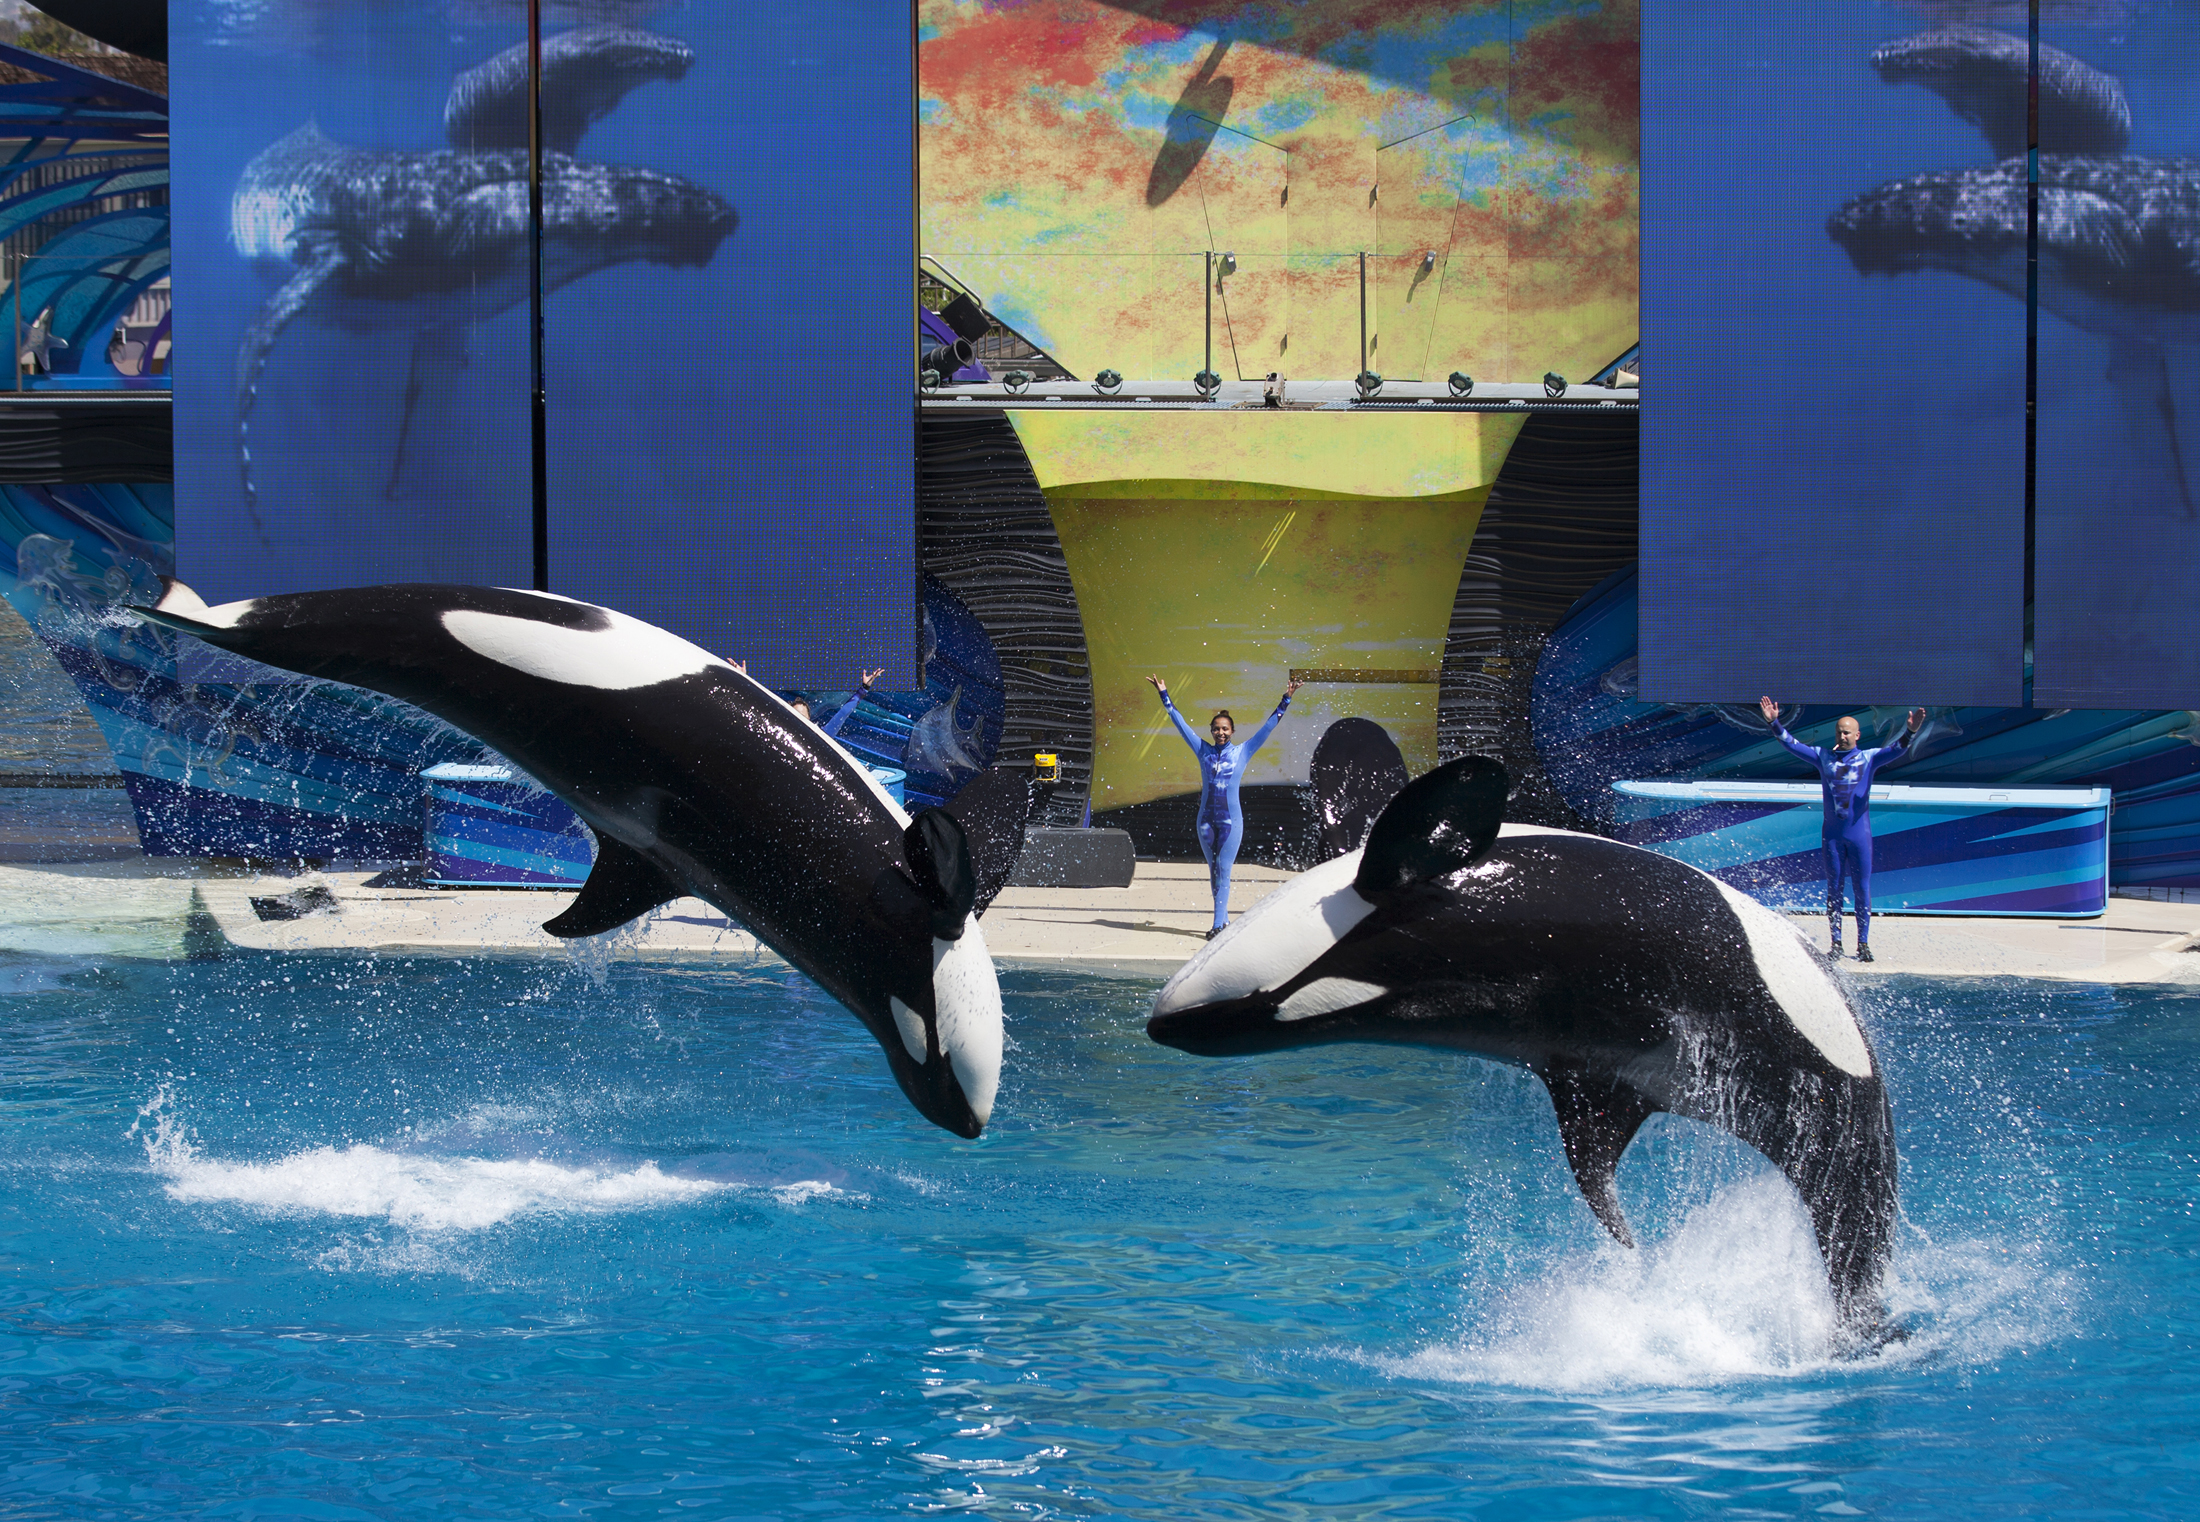 Trainers have Orca killer whales perform for the crowd during a show at the animal theme park SeaWorld in San Diego, California March 19, 2014. (REUTERS/Mike Blake)